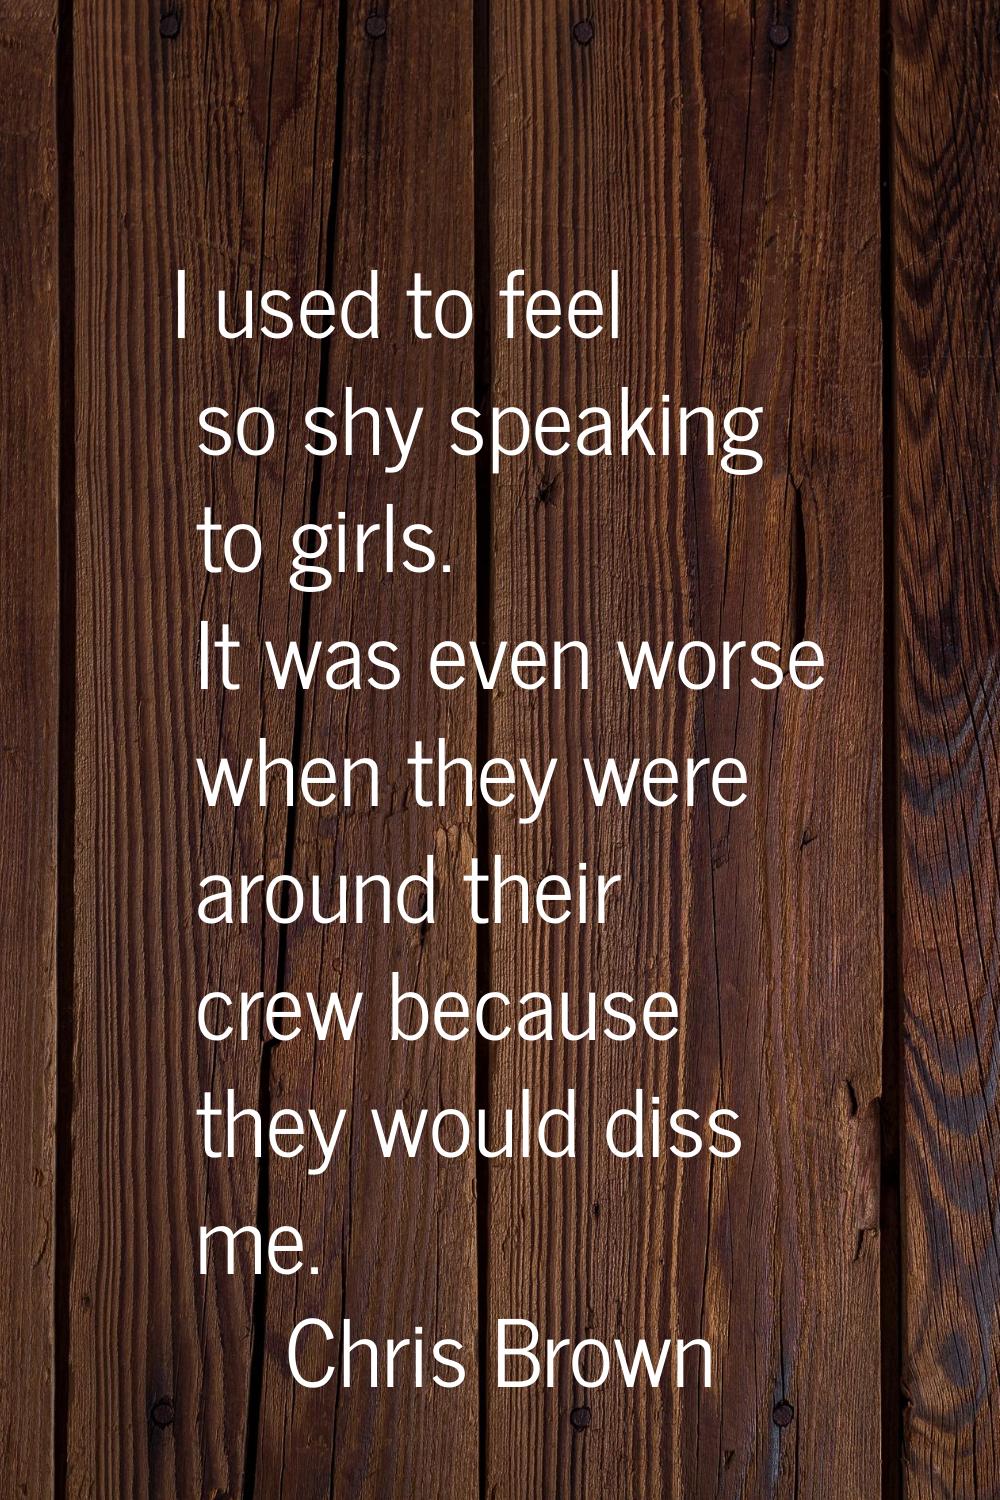 I used to feel so shy speaking to girls. It was even worse when they were around their crew because